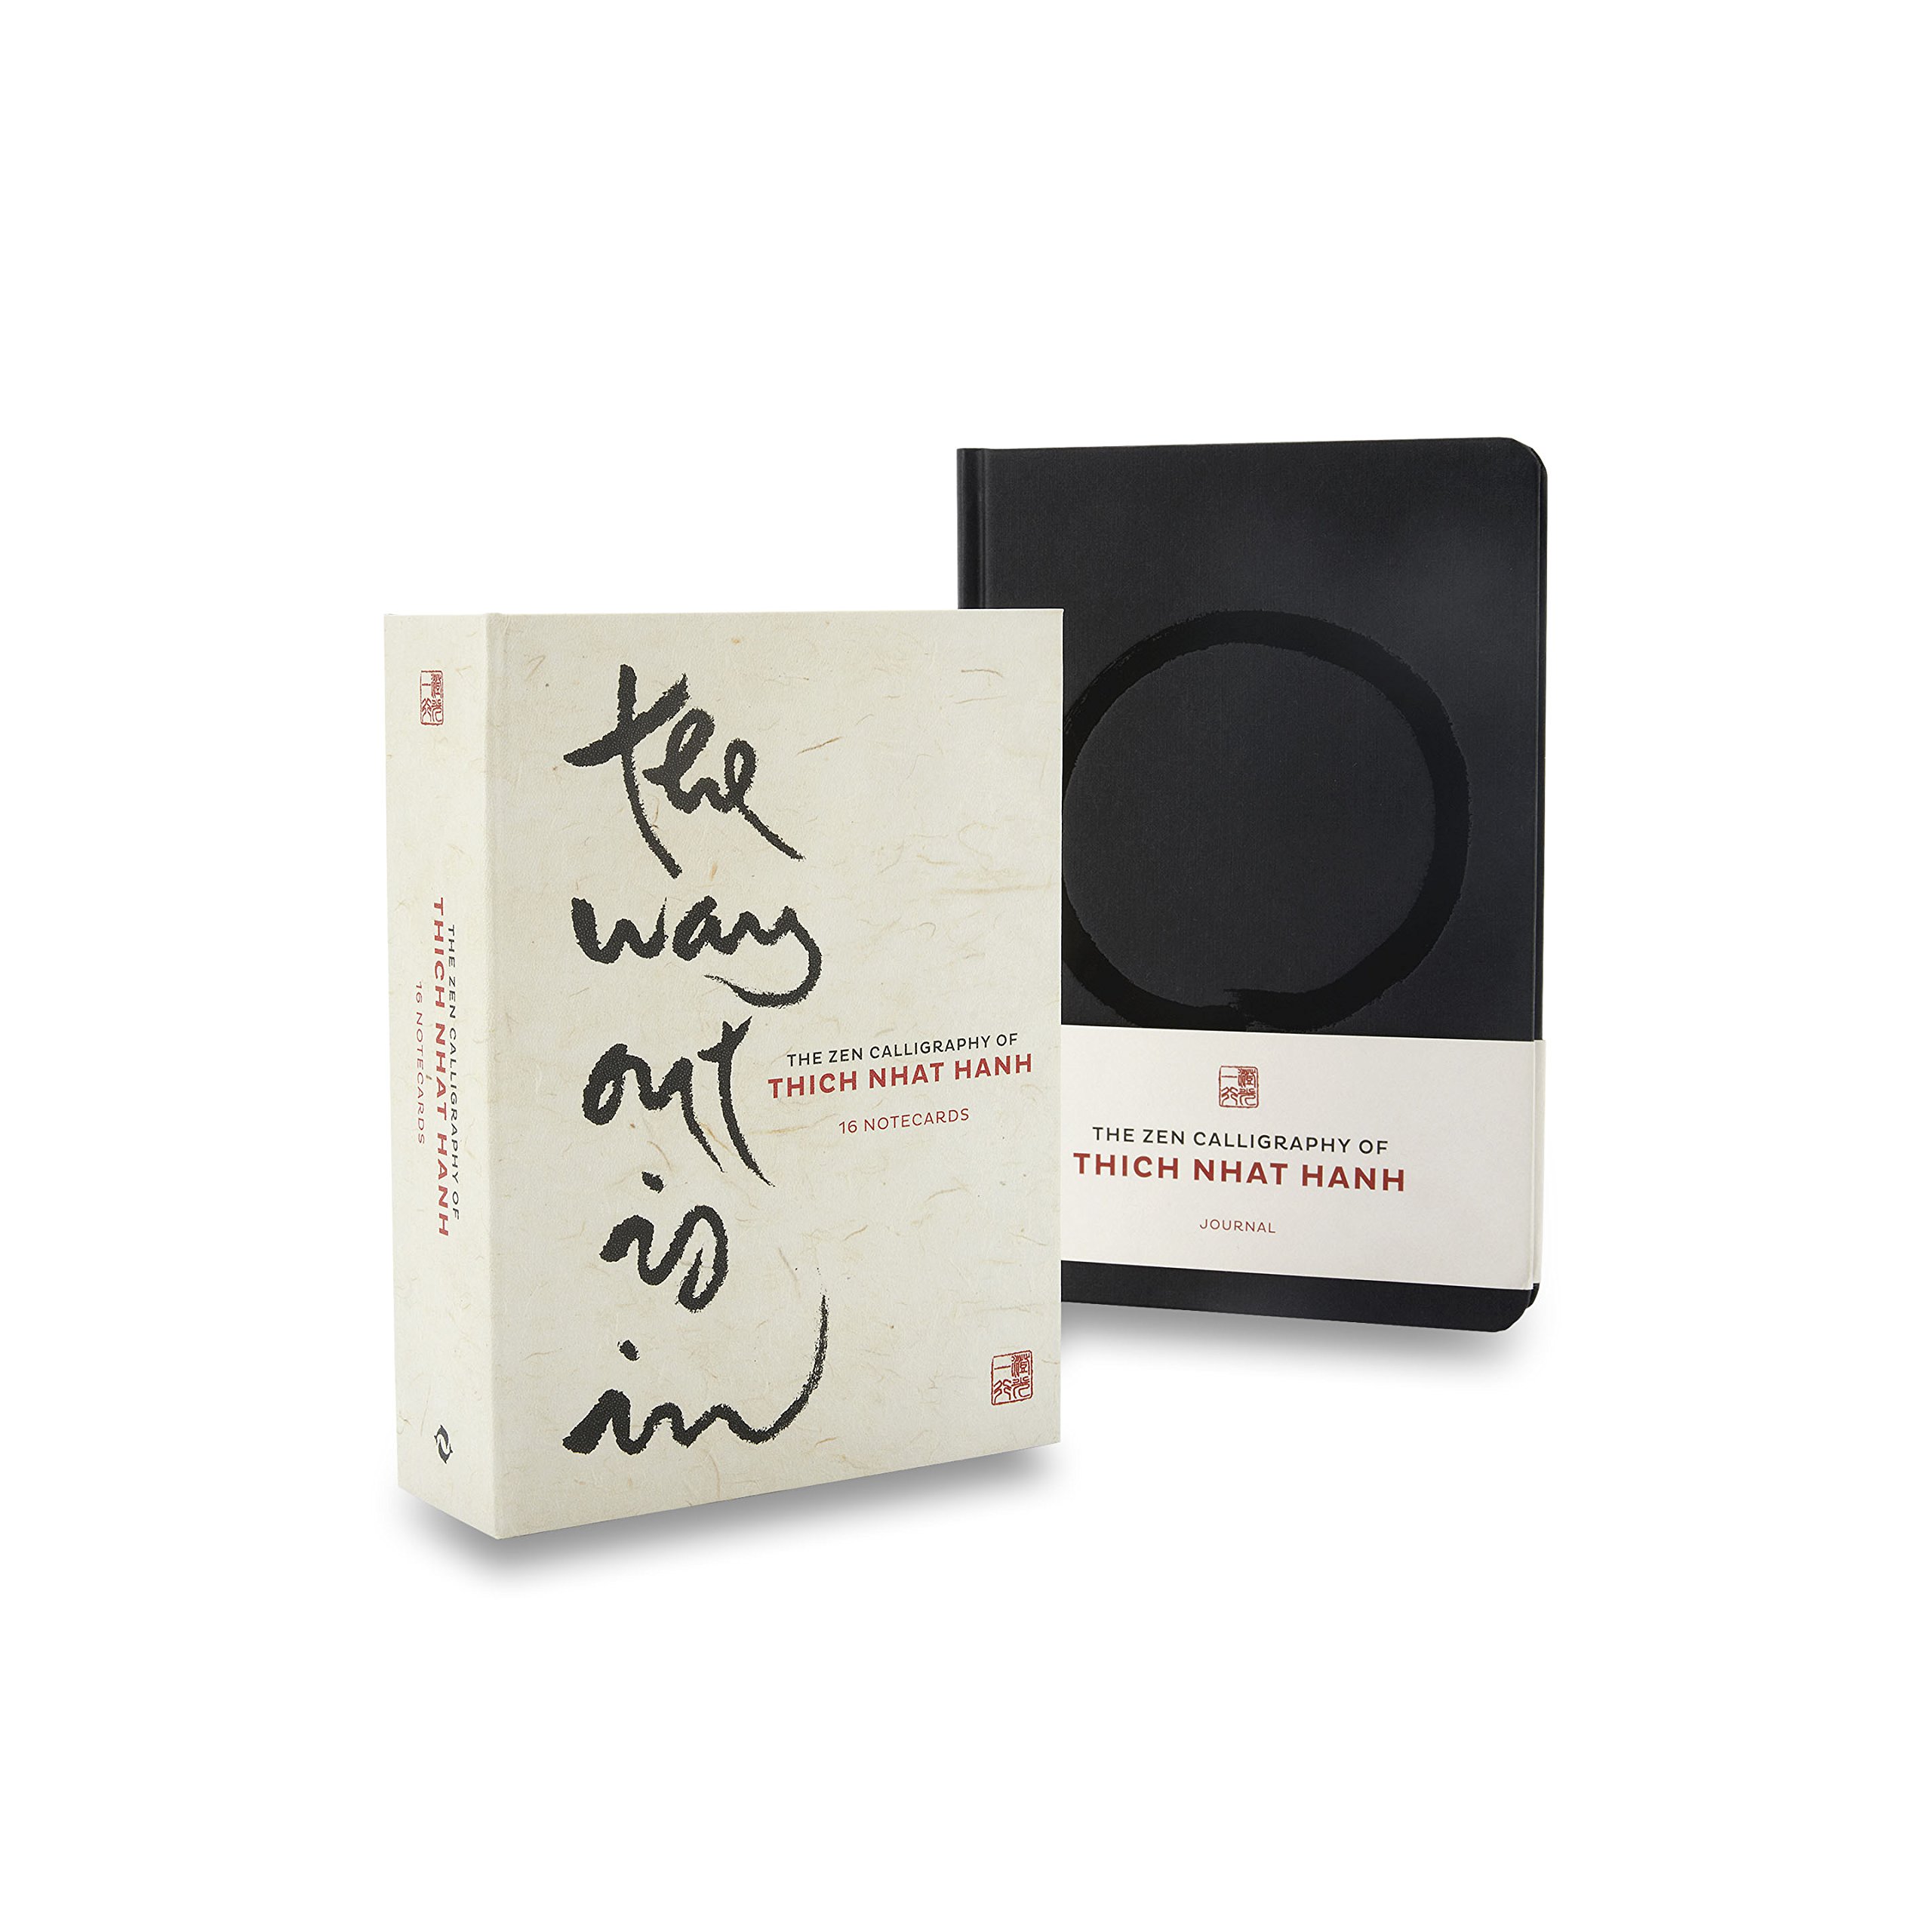 Carti postale - Way Out is In: The Zen Calligraphy of Thich Nhat Hanh | Thames & Hudson Ltd